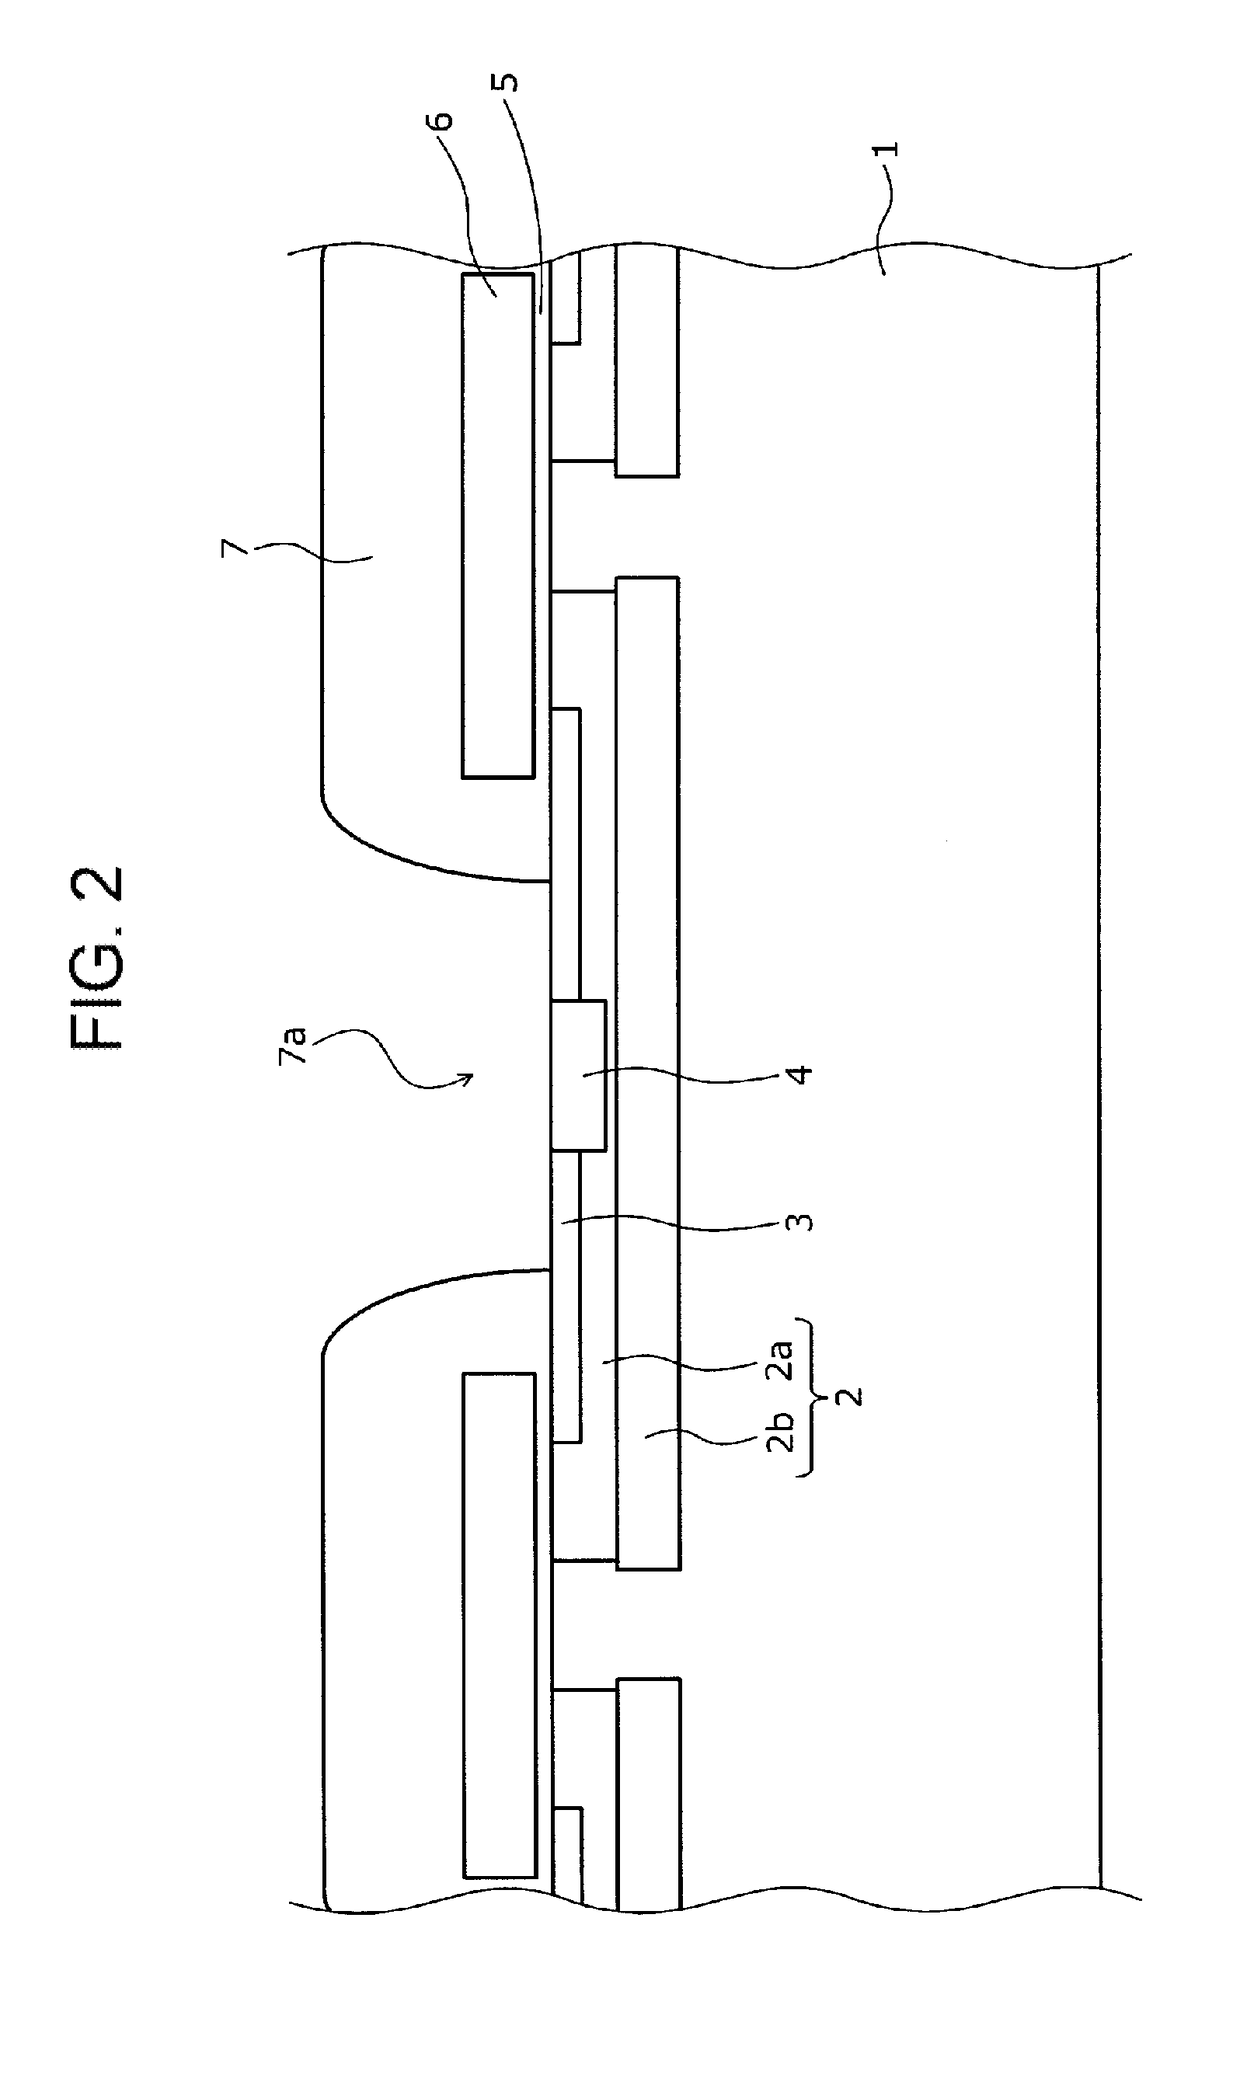 Method for manufacturing a semiconductor device by exposing, to a hydrogen plasma atmosphere, a semiconductor substrate